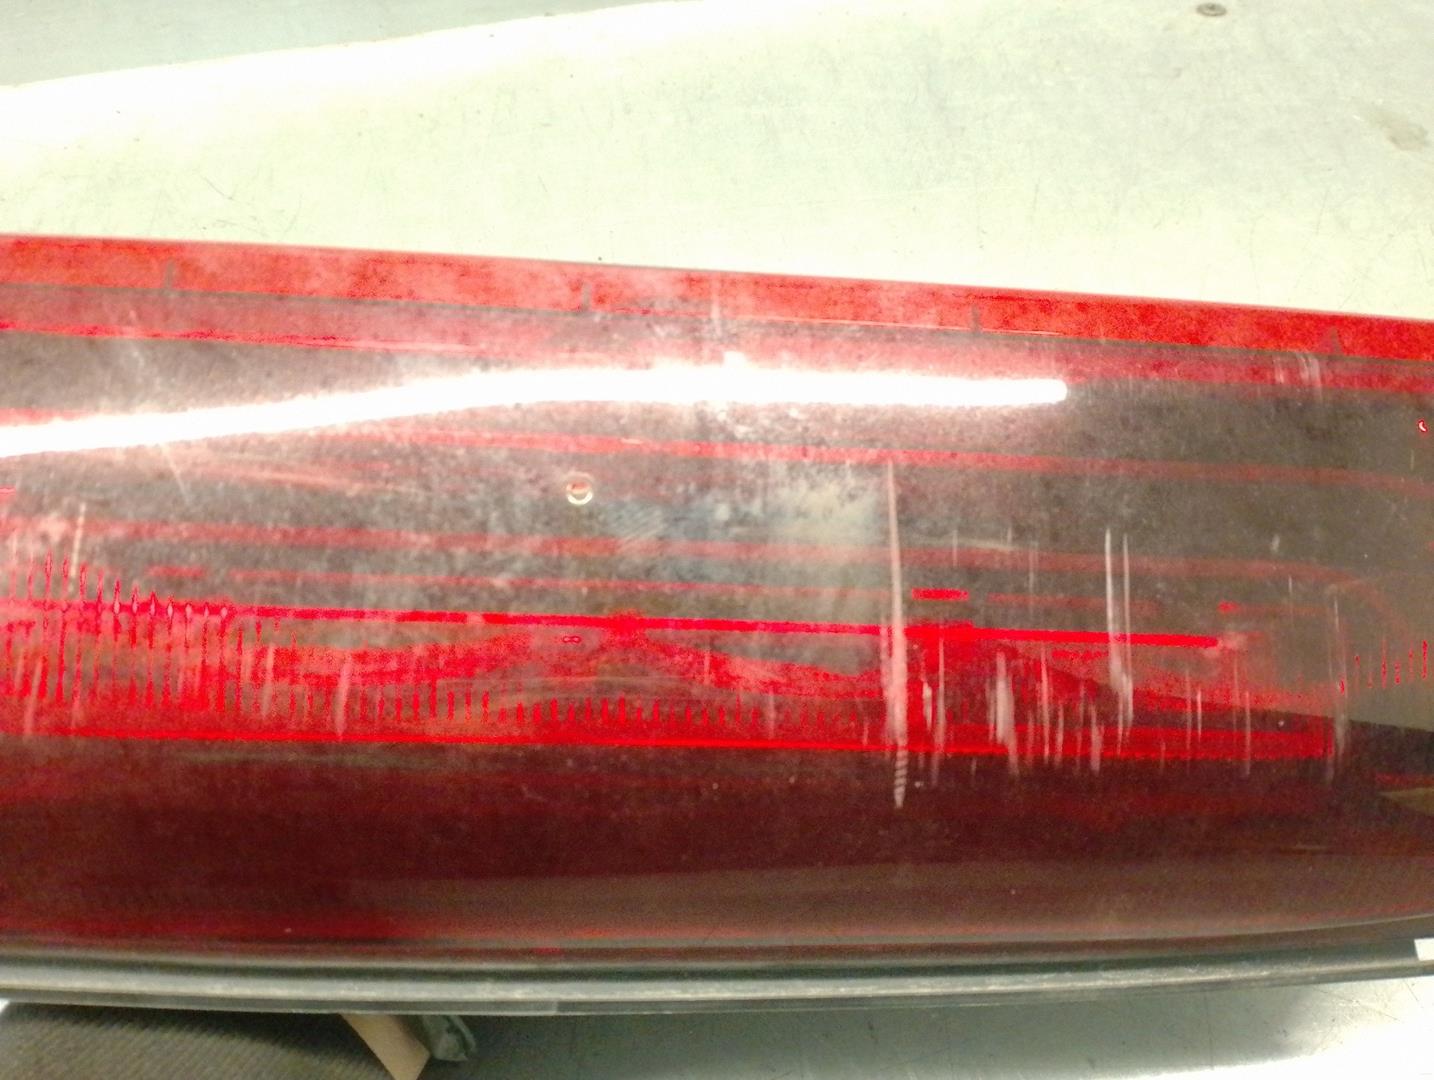 FORD Transit Connect 1 generation (2002-2024) Rear cover light 1899757, DT1113R601AE, 6PUERTAS 24218007